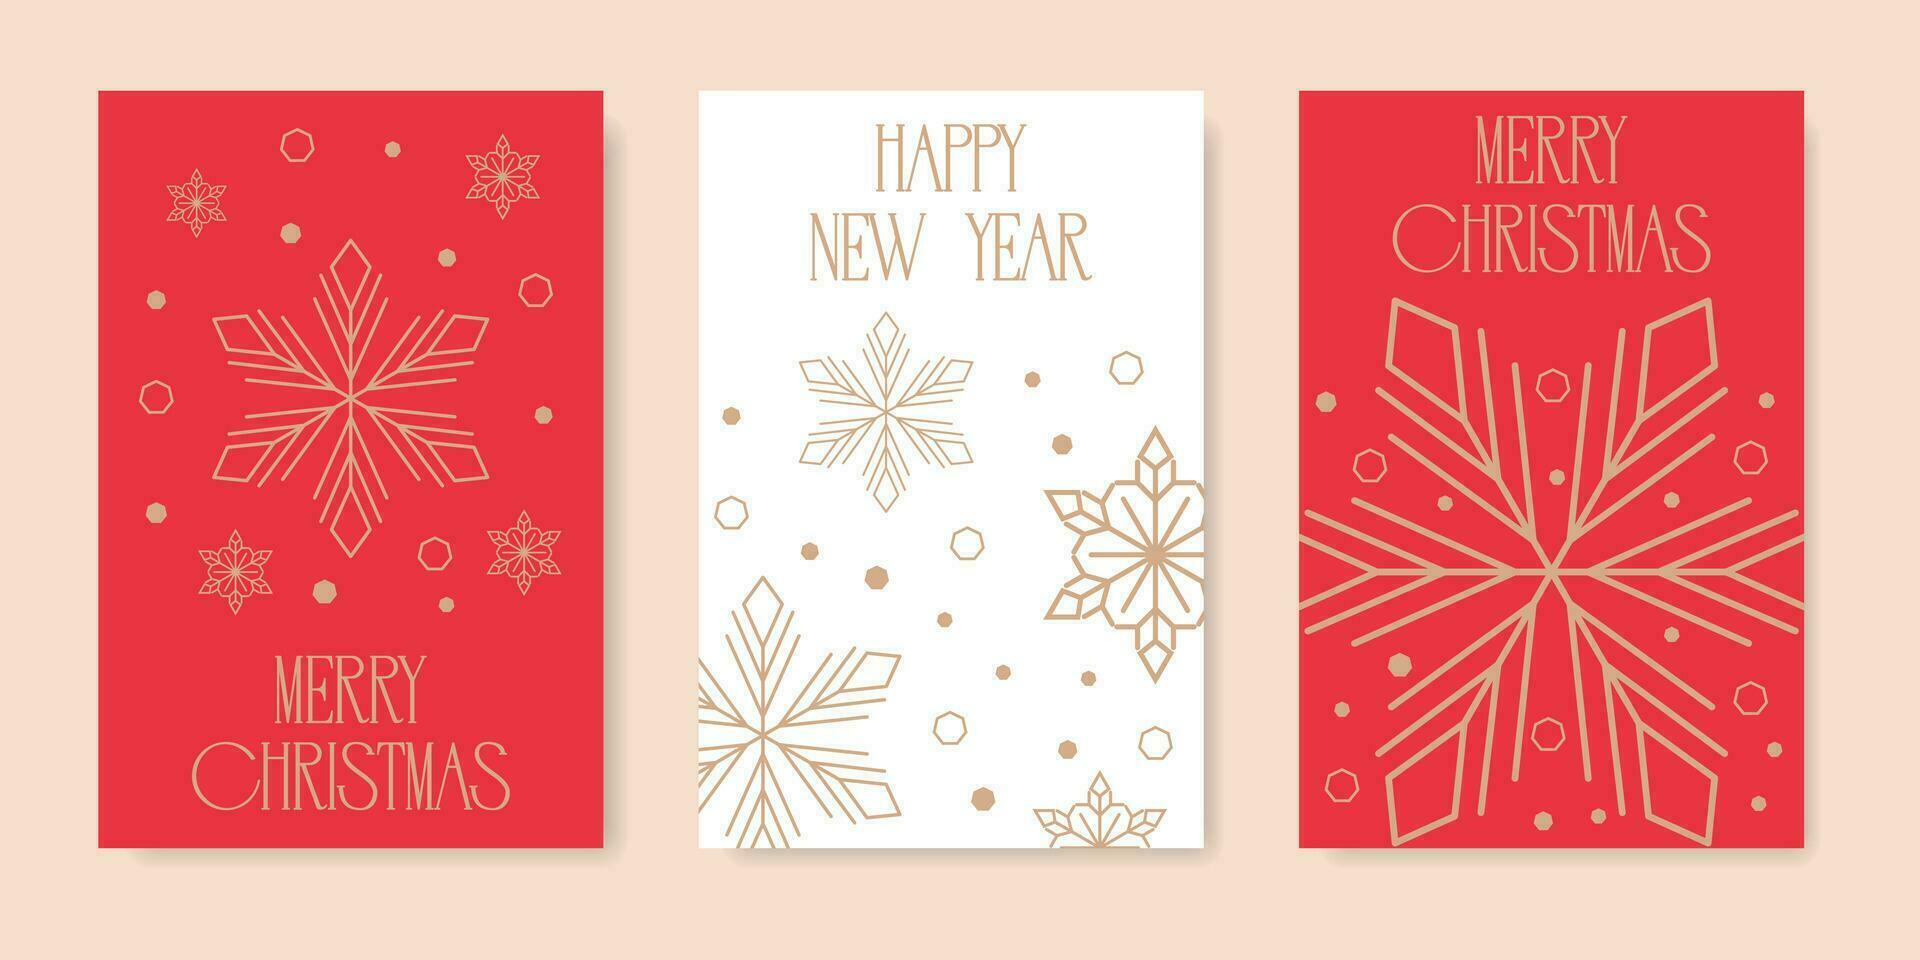 A set of Christmas cards with snowflakes in red and gold tones. vector